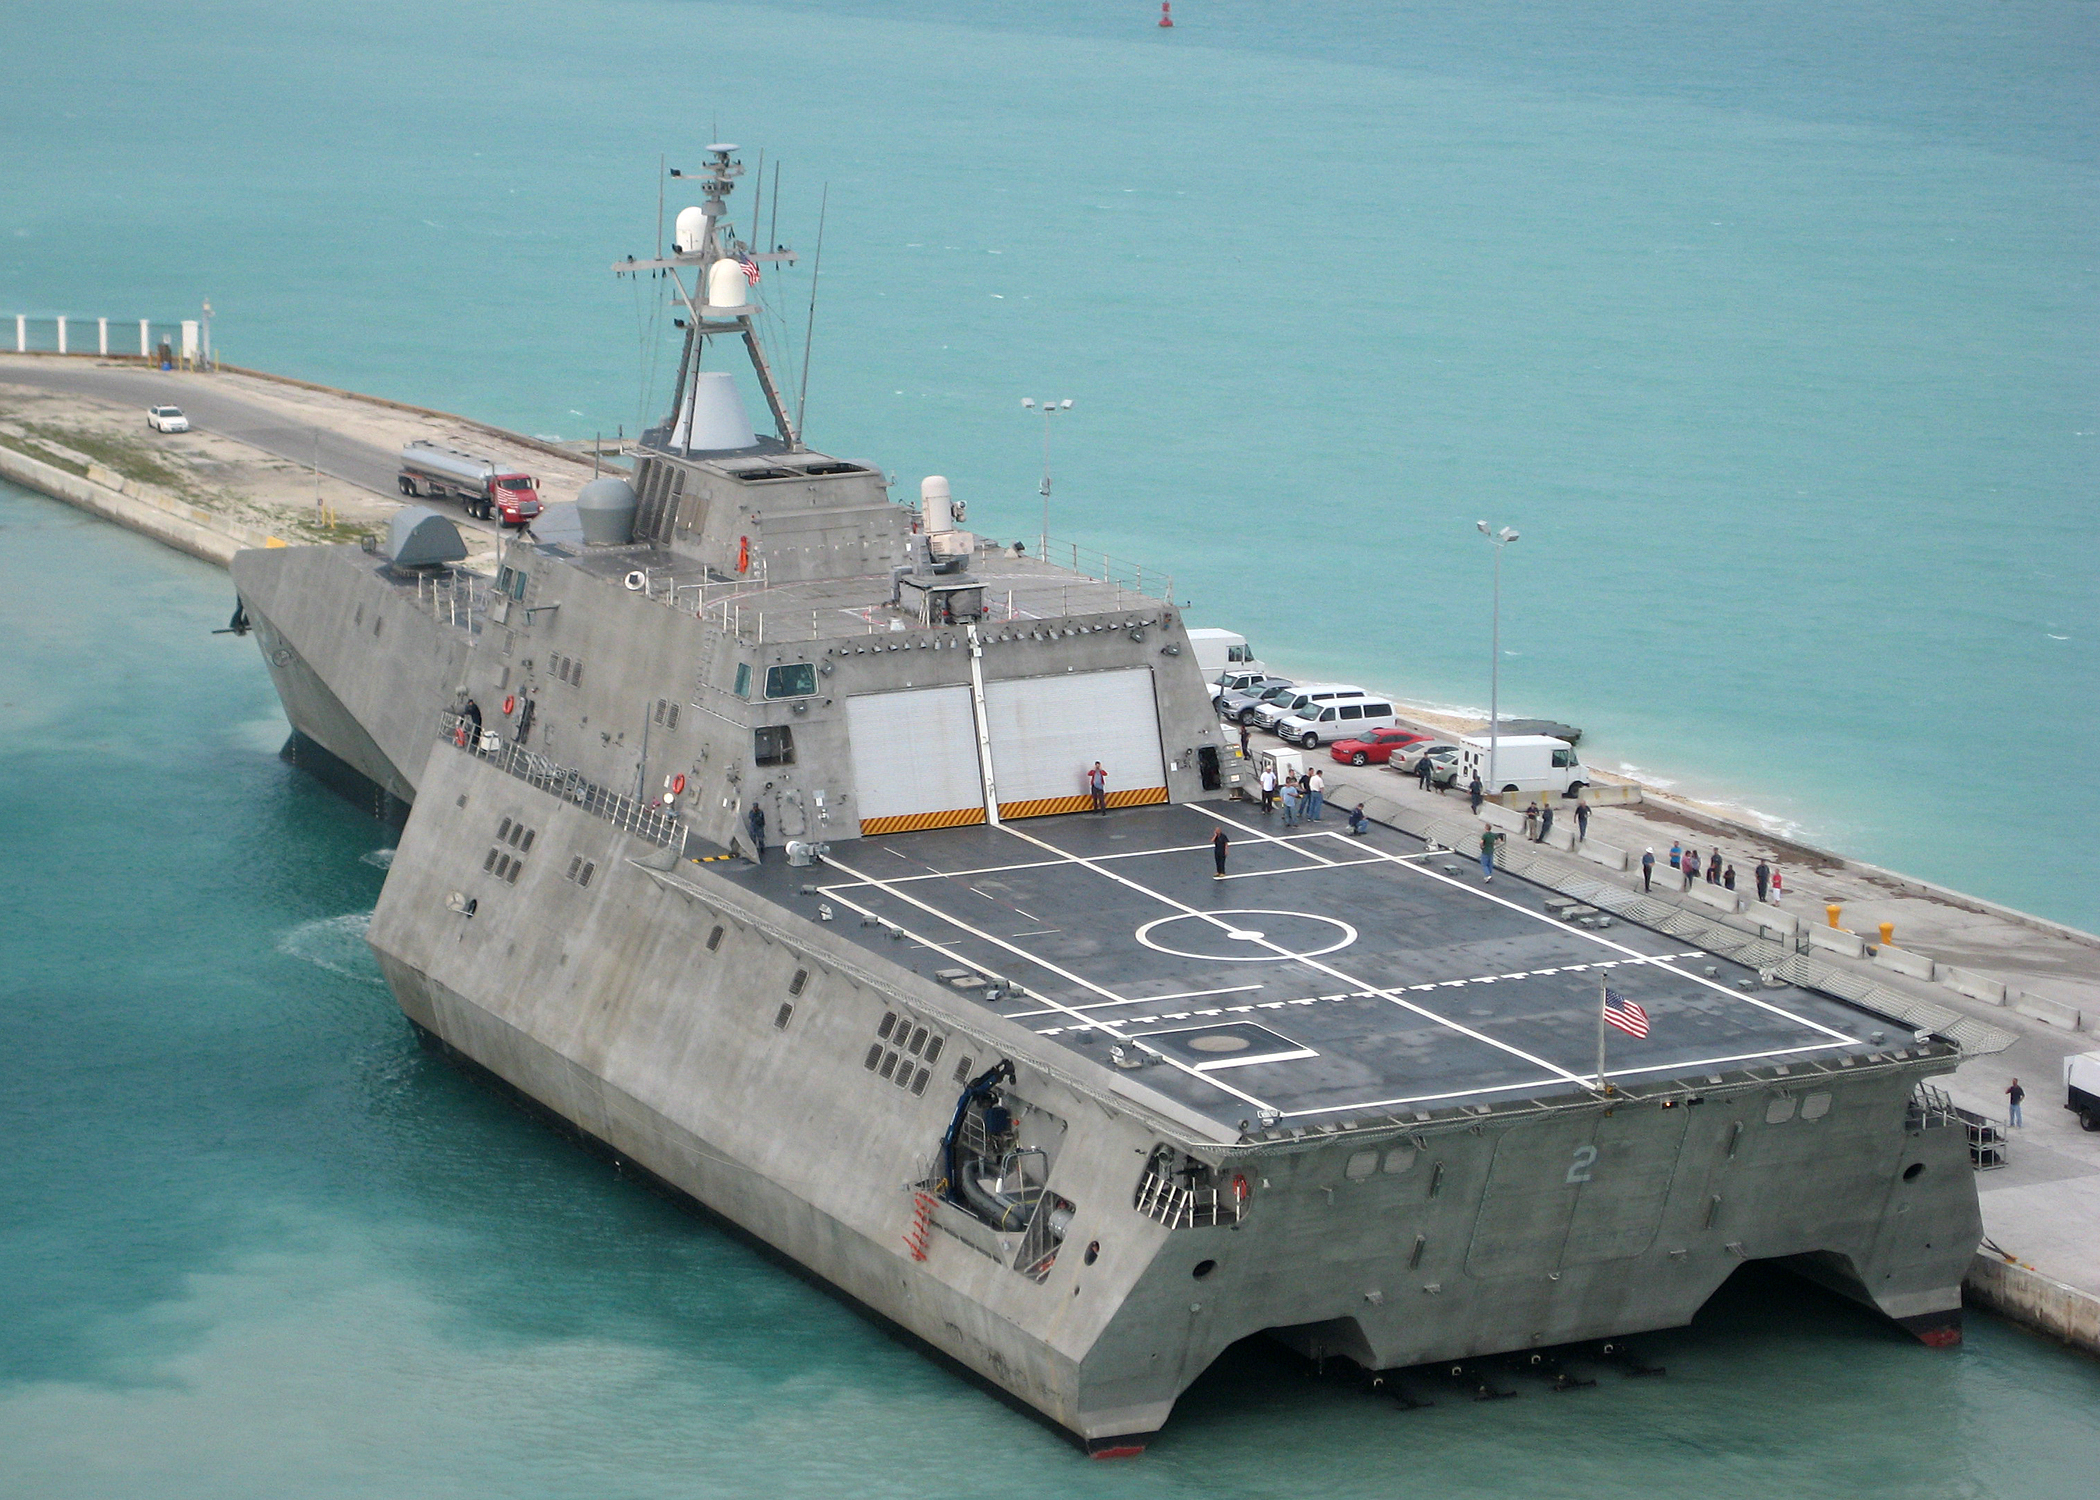 US_Navy_100329-N-1481K-293_USS_Independence_(LCS_2)_arrives_at_Mole_Pier_at_Naval_Air_Station_Key_West.jpg